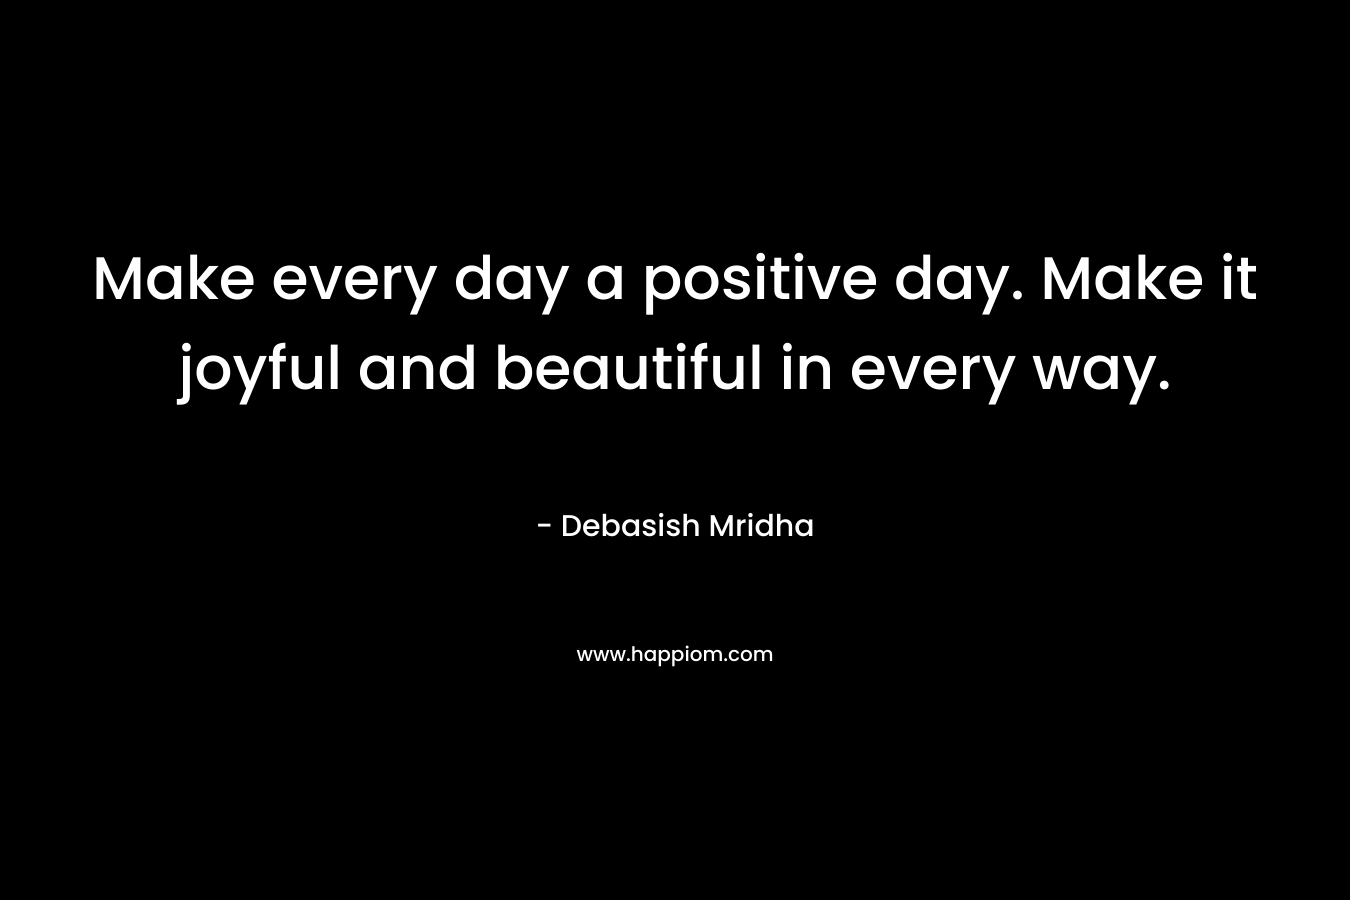 Make every day a positive day. Make it joyful and beautiful in every way.